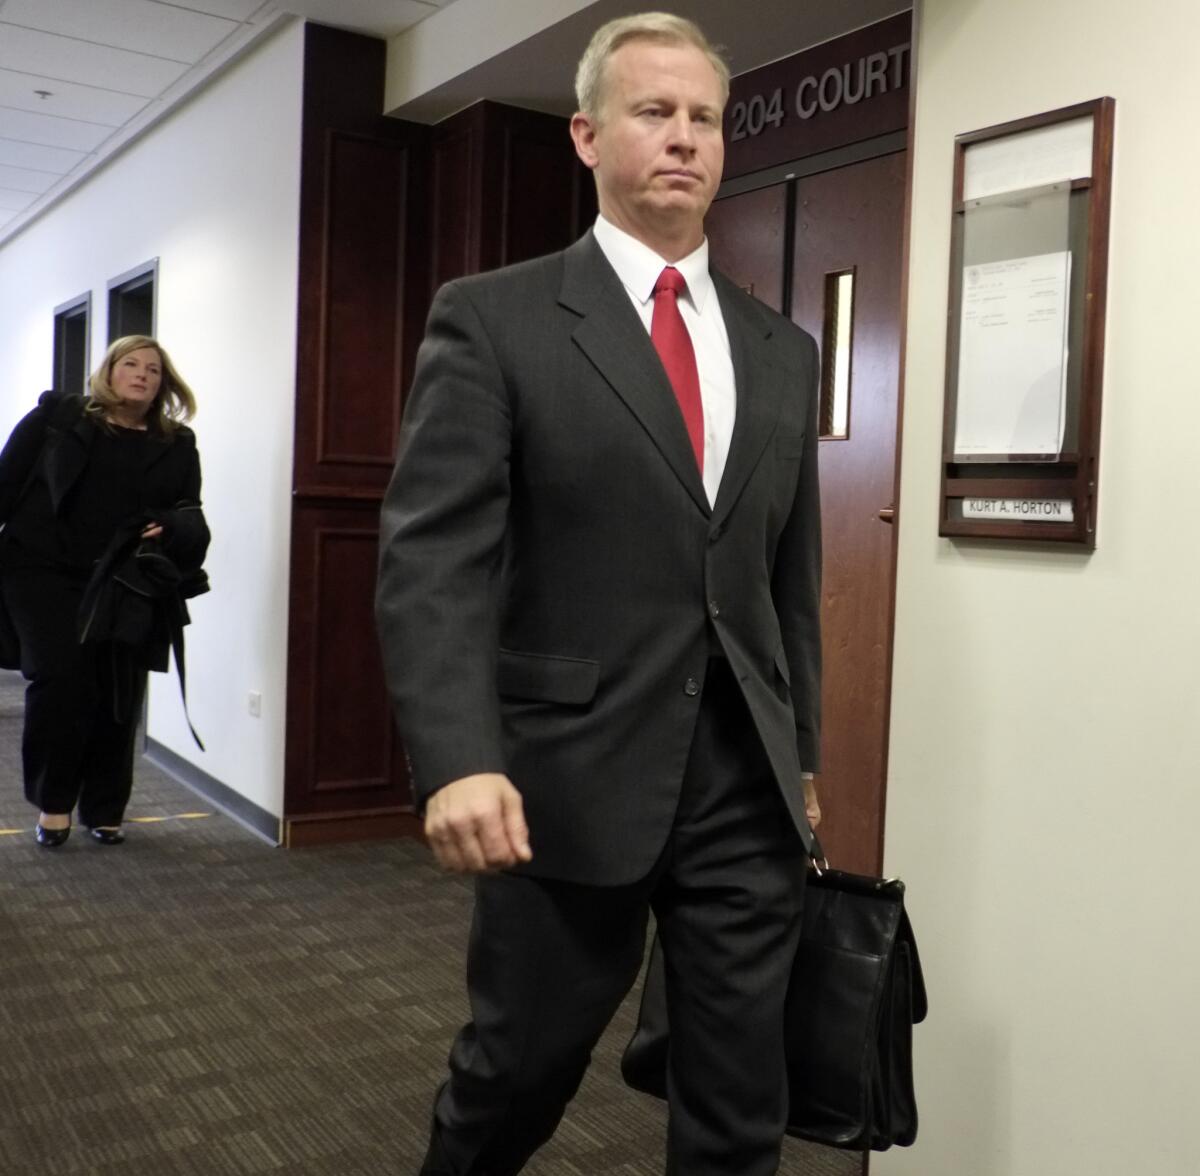 District Atty. George Brauchler leaves district court in Centennial, Colo., after a hearing in the James Holmes case. Brauchler requested a second mental evaluation of Holmes. As a result, district judge Carlos A. Samour Jr. postponed the start of the trial, which had been scheduled for February.